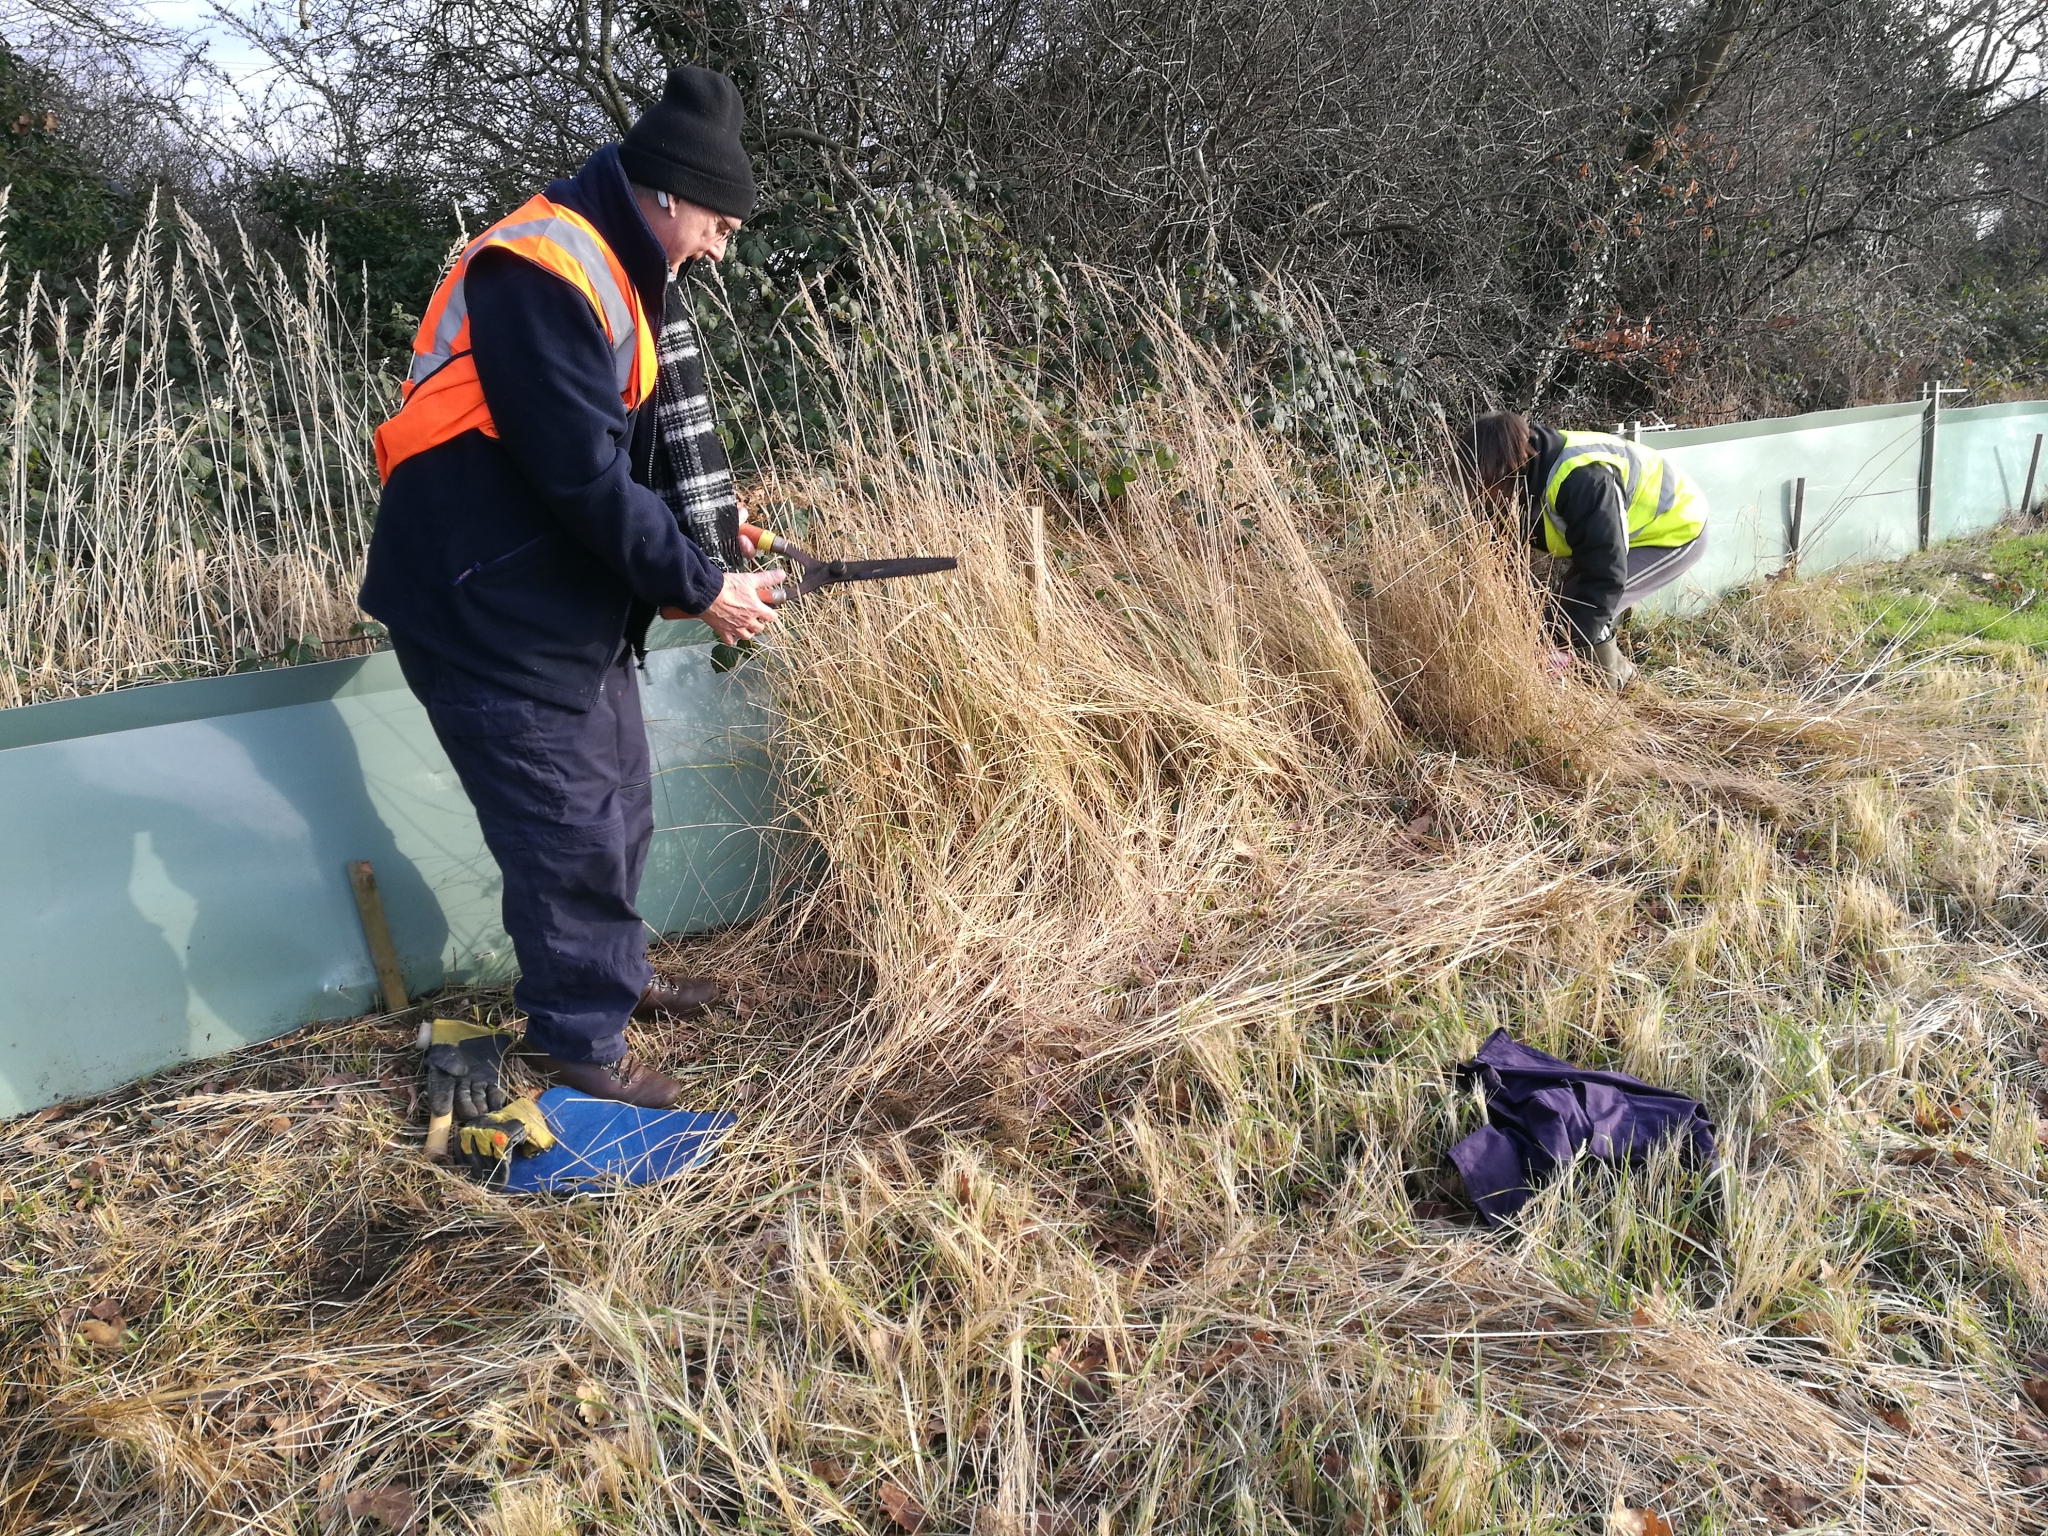 A photo from the FoTF Conservation Event - January 2022 - Erection of toad fence : A volunteer holds a pair of shears ready to cut down long grass from around the toad fence